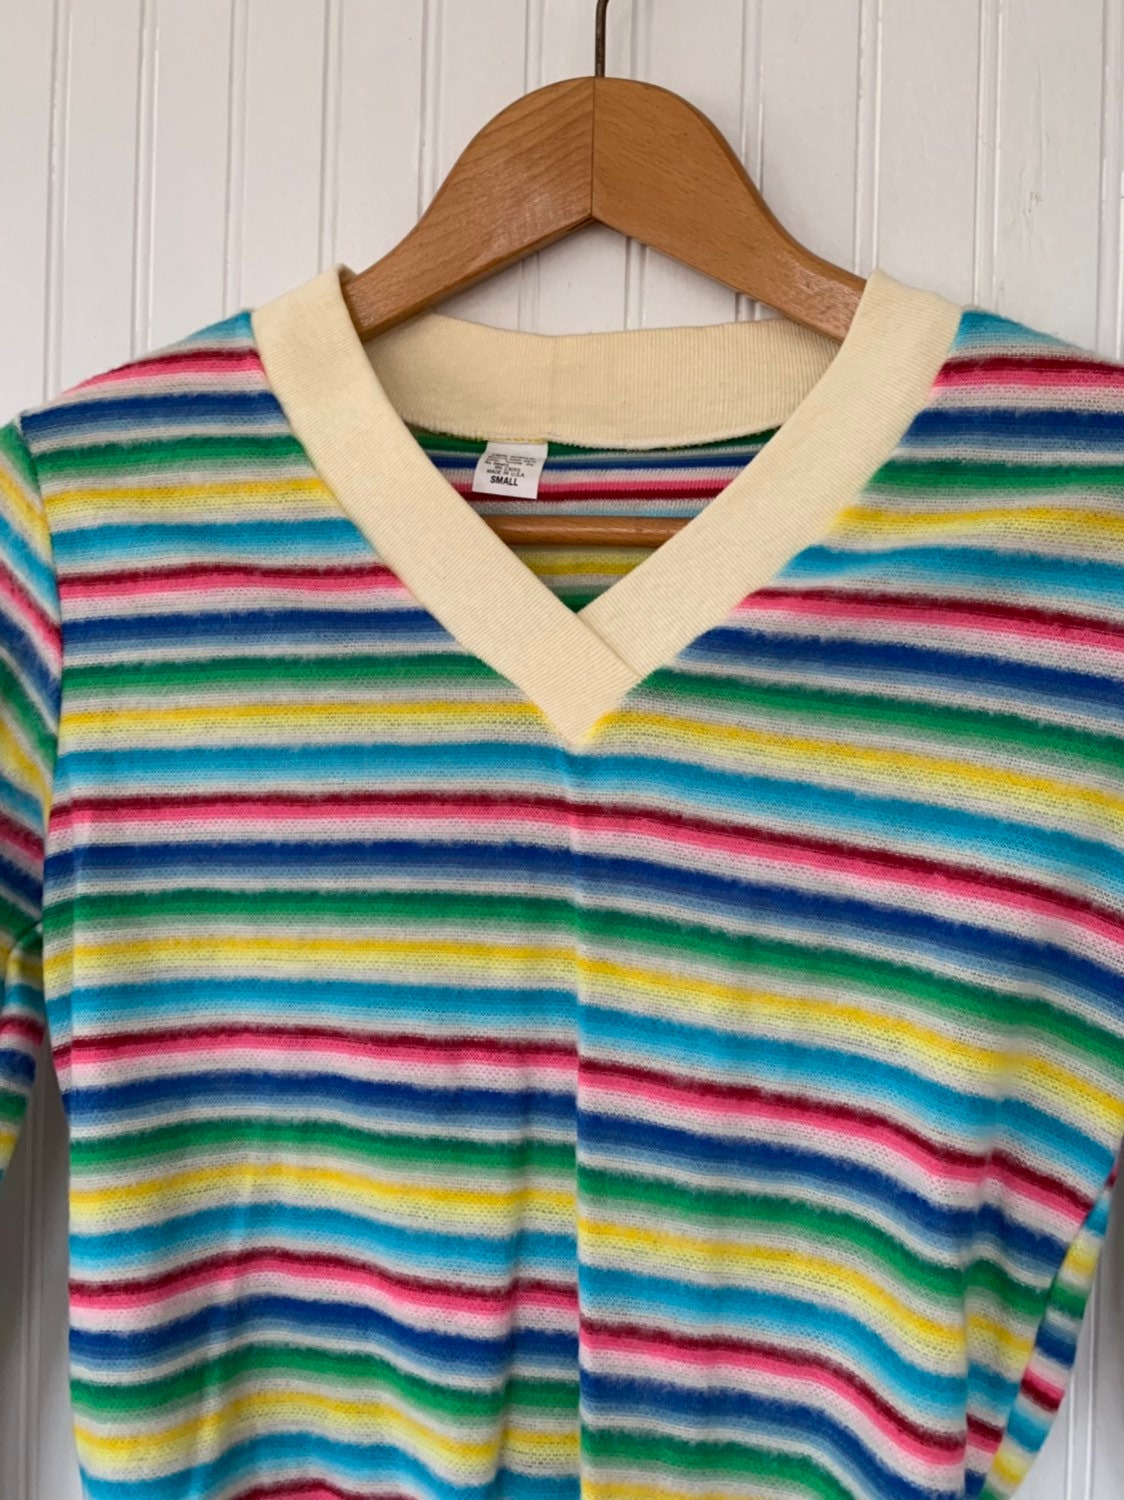 NWT Vintage 80s Rainbow Striped Shirt Sweater Small S Sm XS Long ...